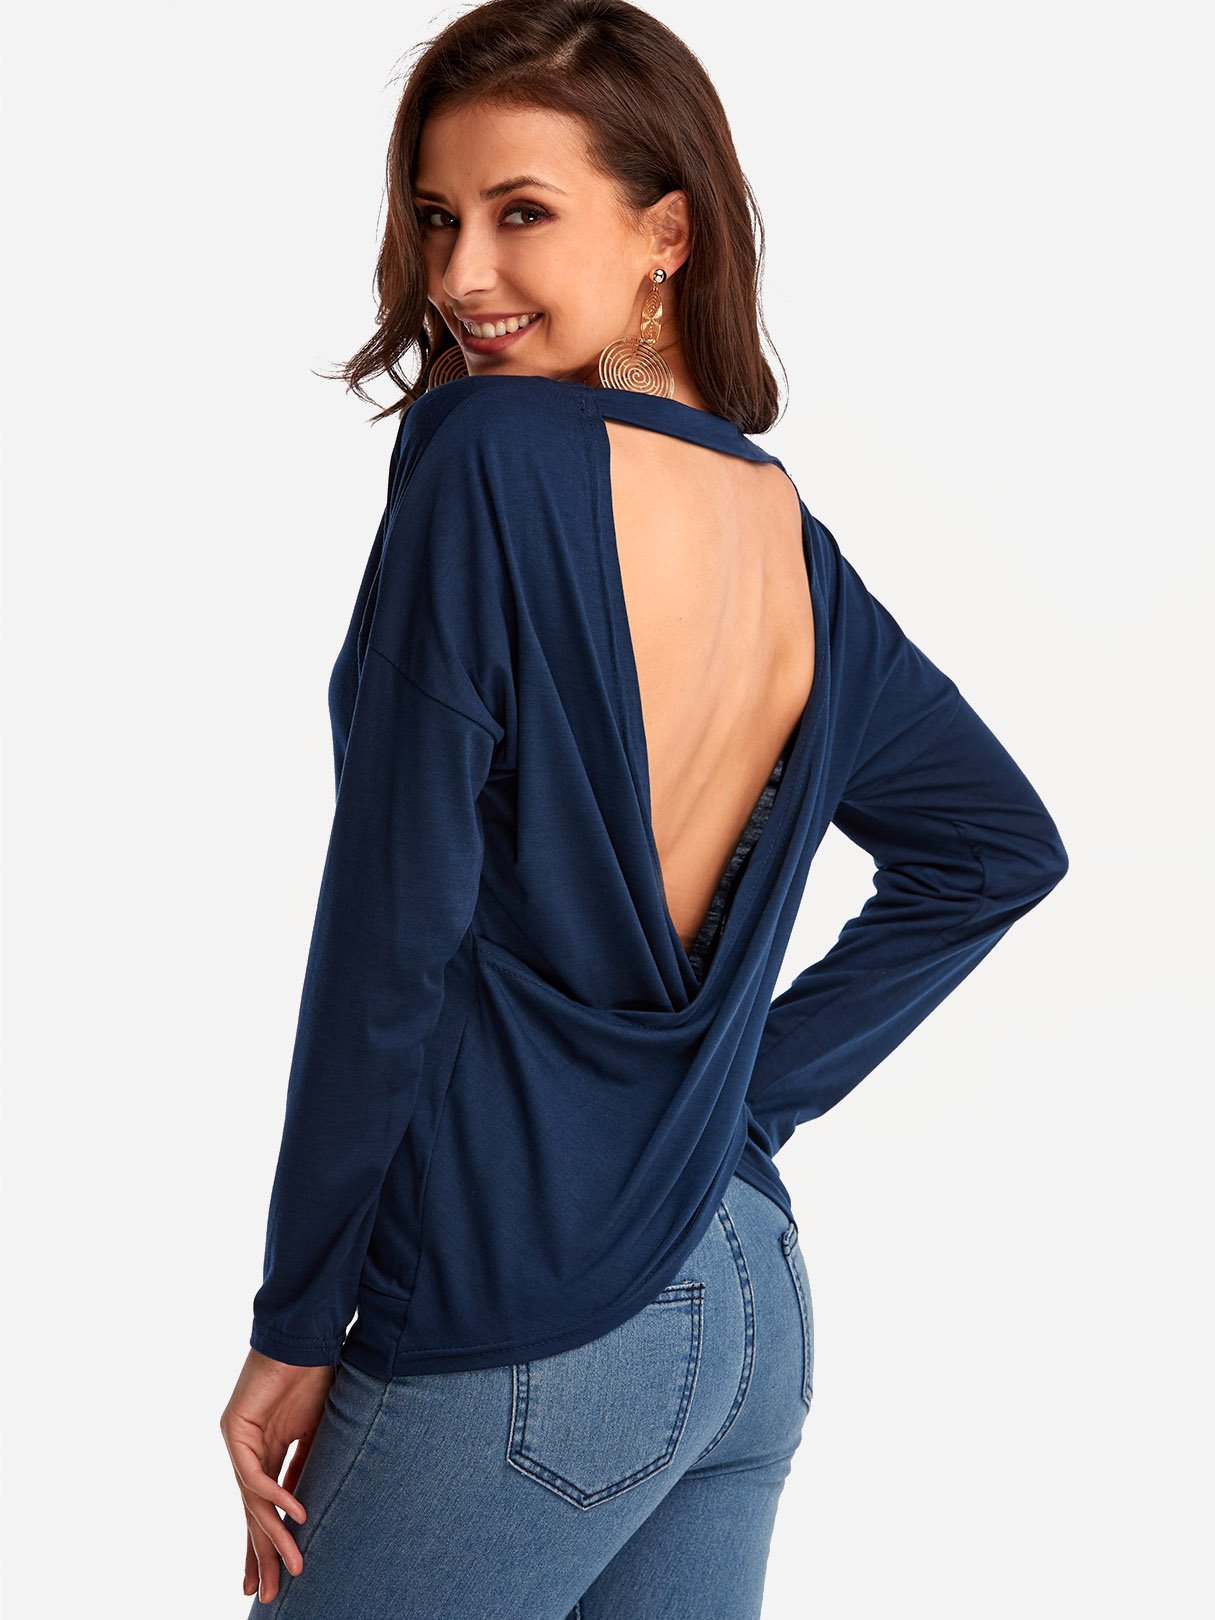 Backless T-Shirts